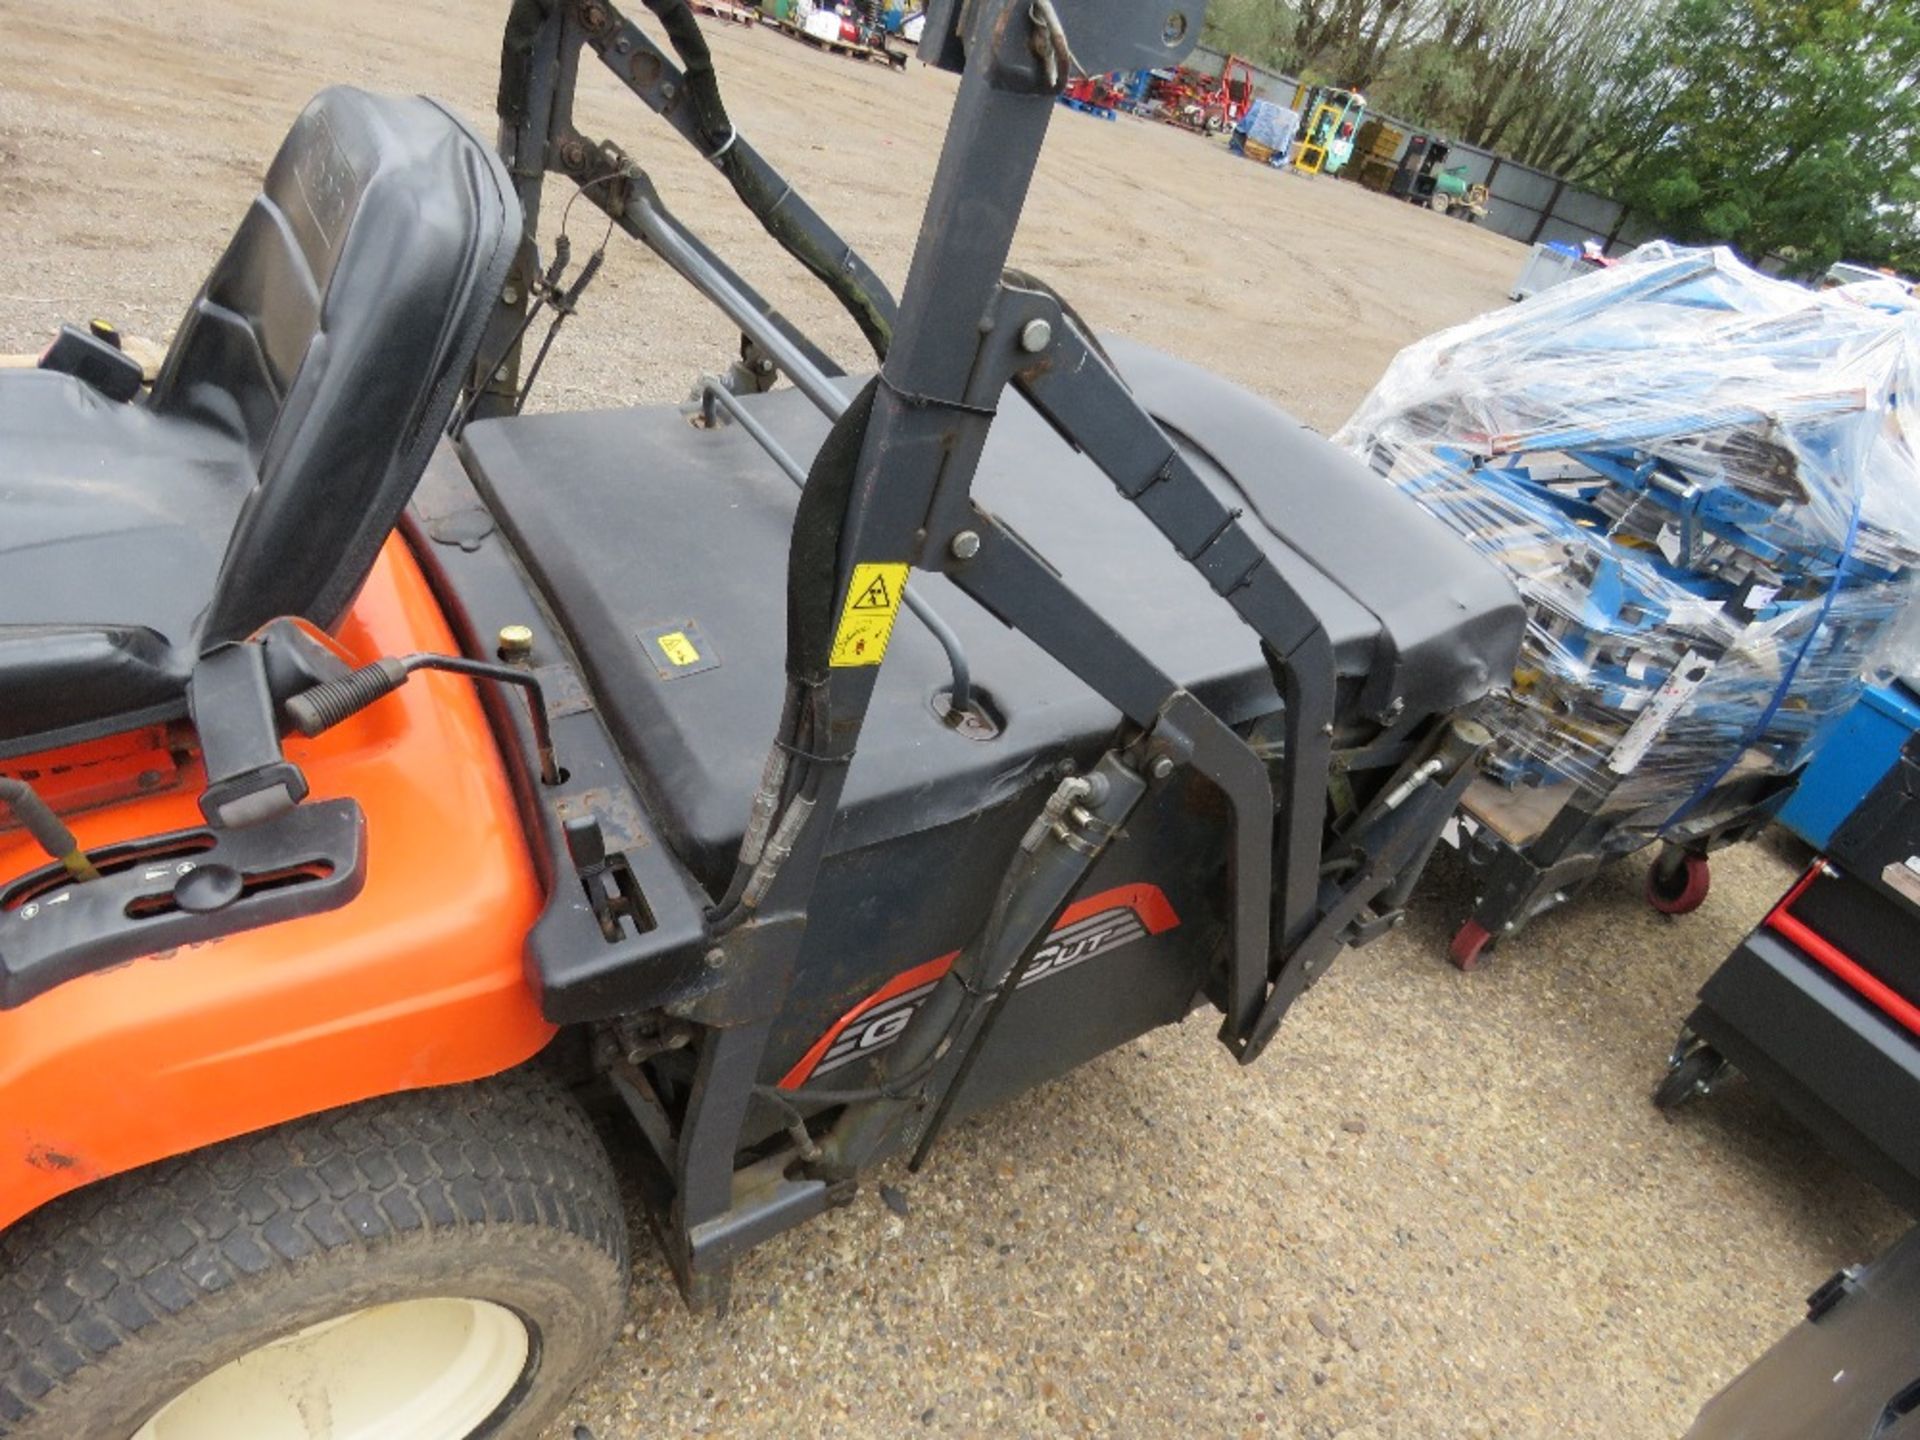 KUBOTA G21E RIDE ON MOWER WITH HIGH DISCHARGE COLLECTOR, YEAR 2014. WHEN TESTED WAS SEEN TO RUN, DRI - Image 3 of 7